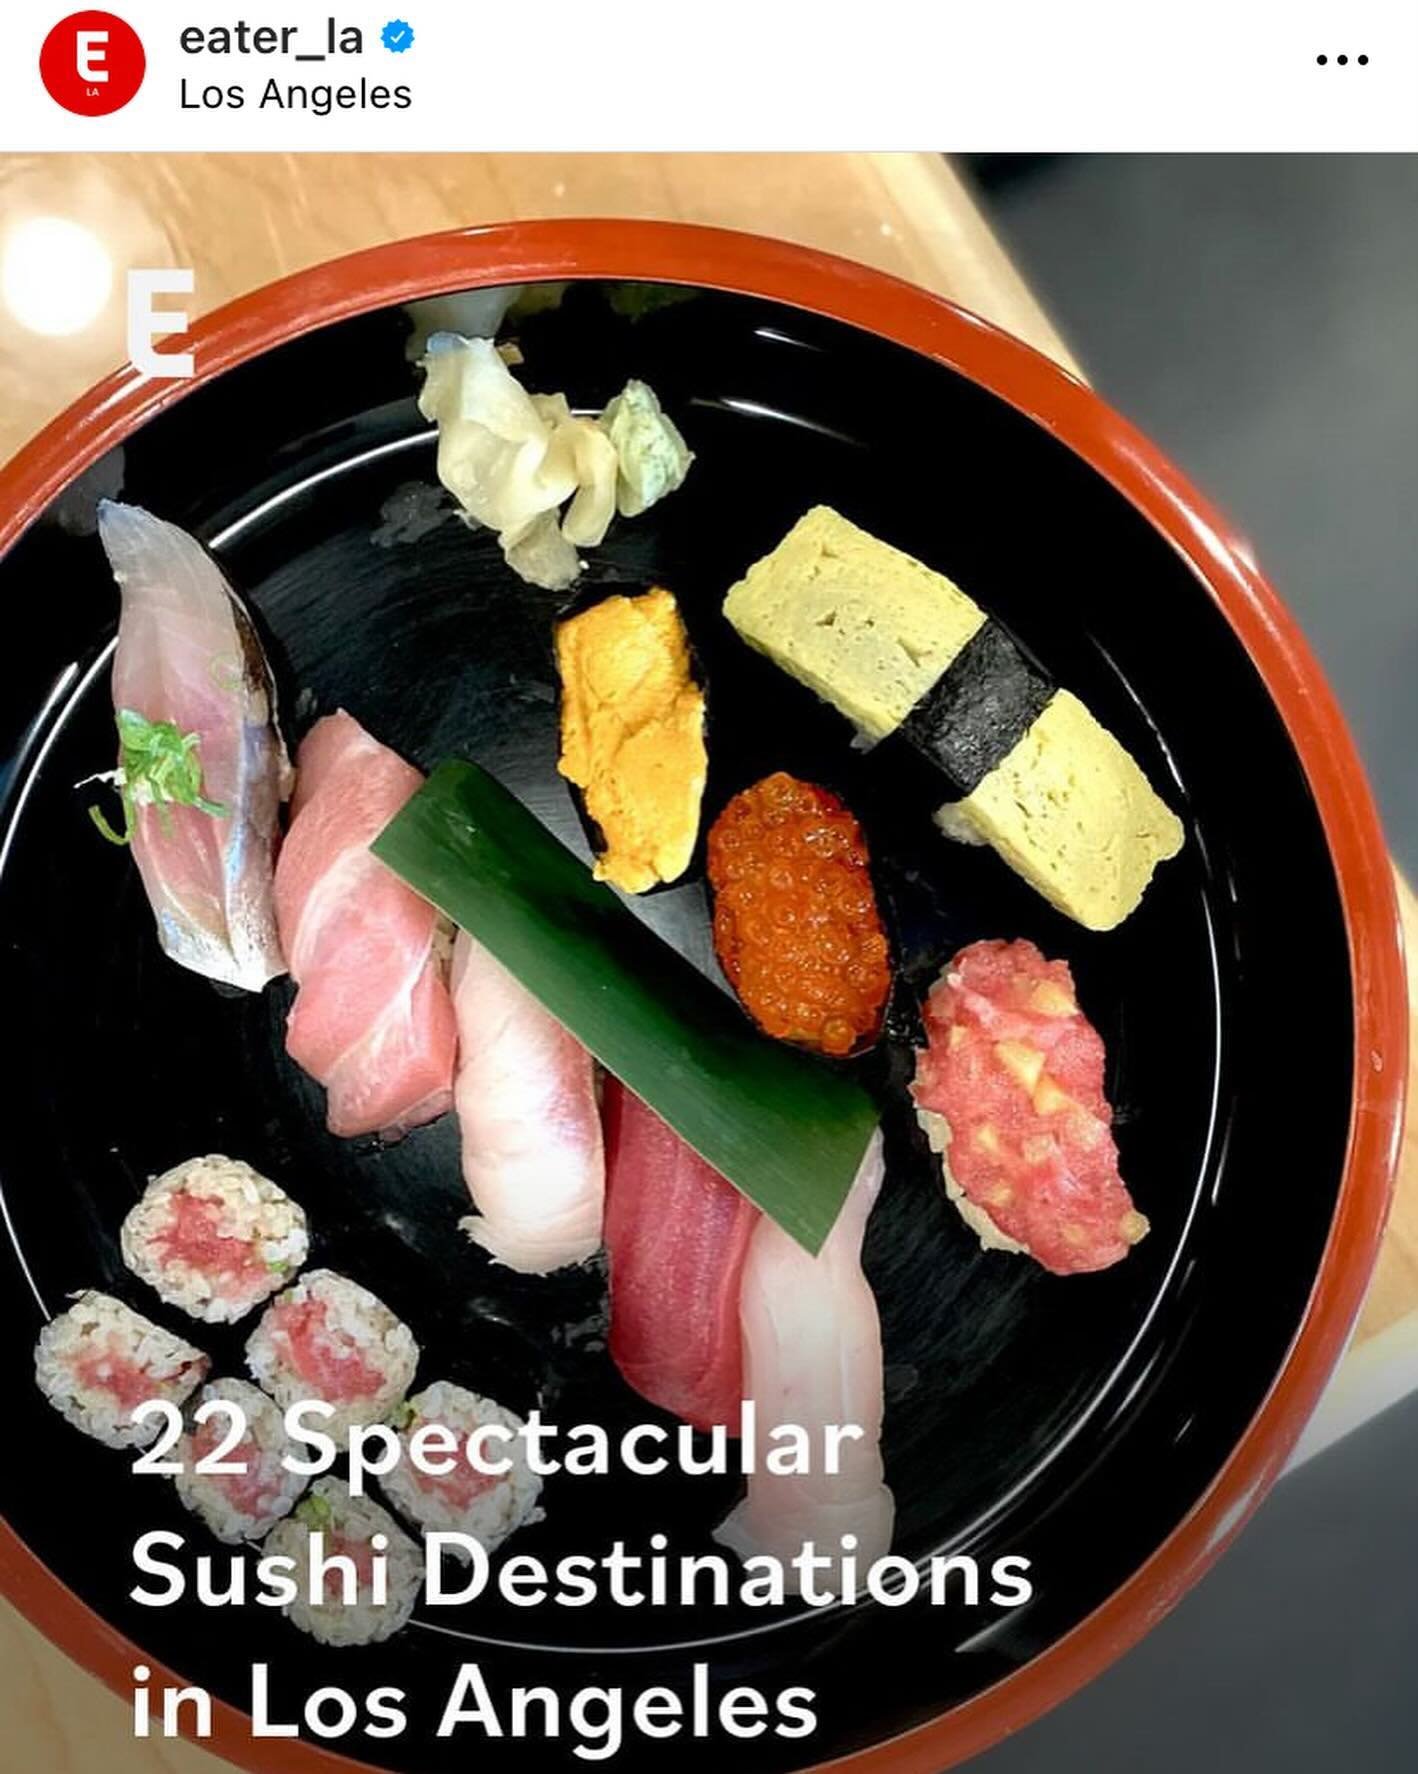 Thank you to @eater_la for including us in this list 🙏🍣